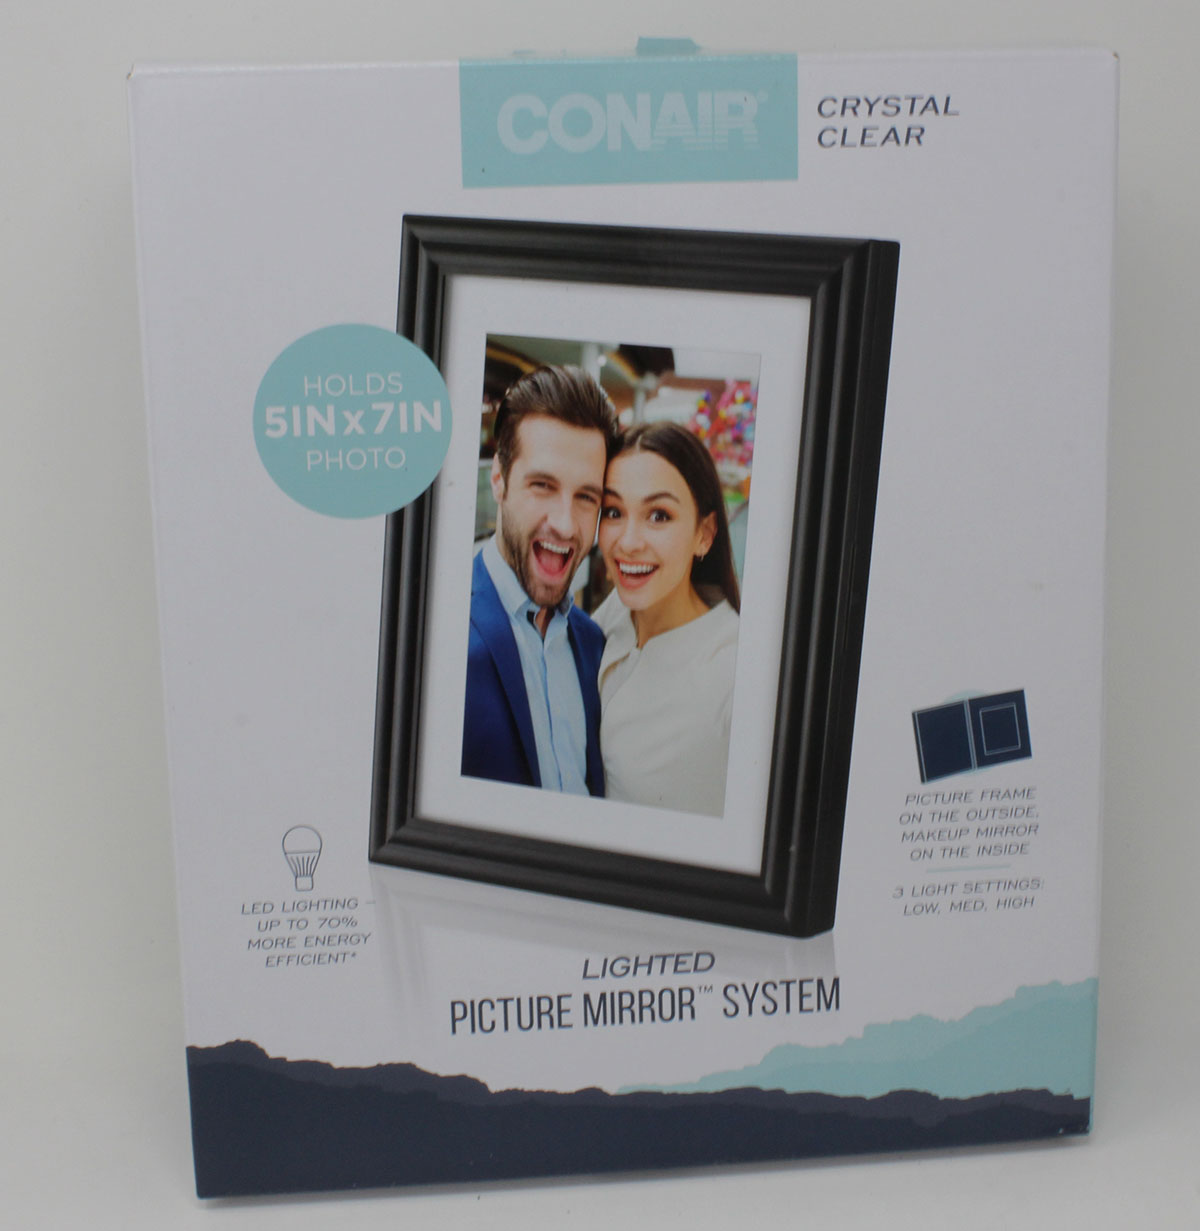 CONAIR CRYSTAL CLEAR LIGHTED PICTURE MIRROR SYSTEM UPC 074108457172